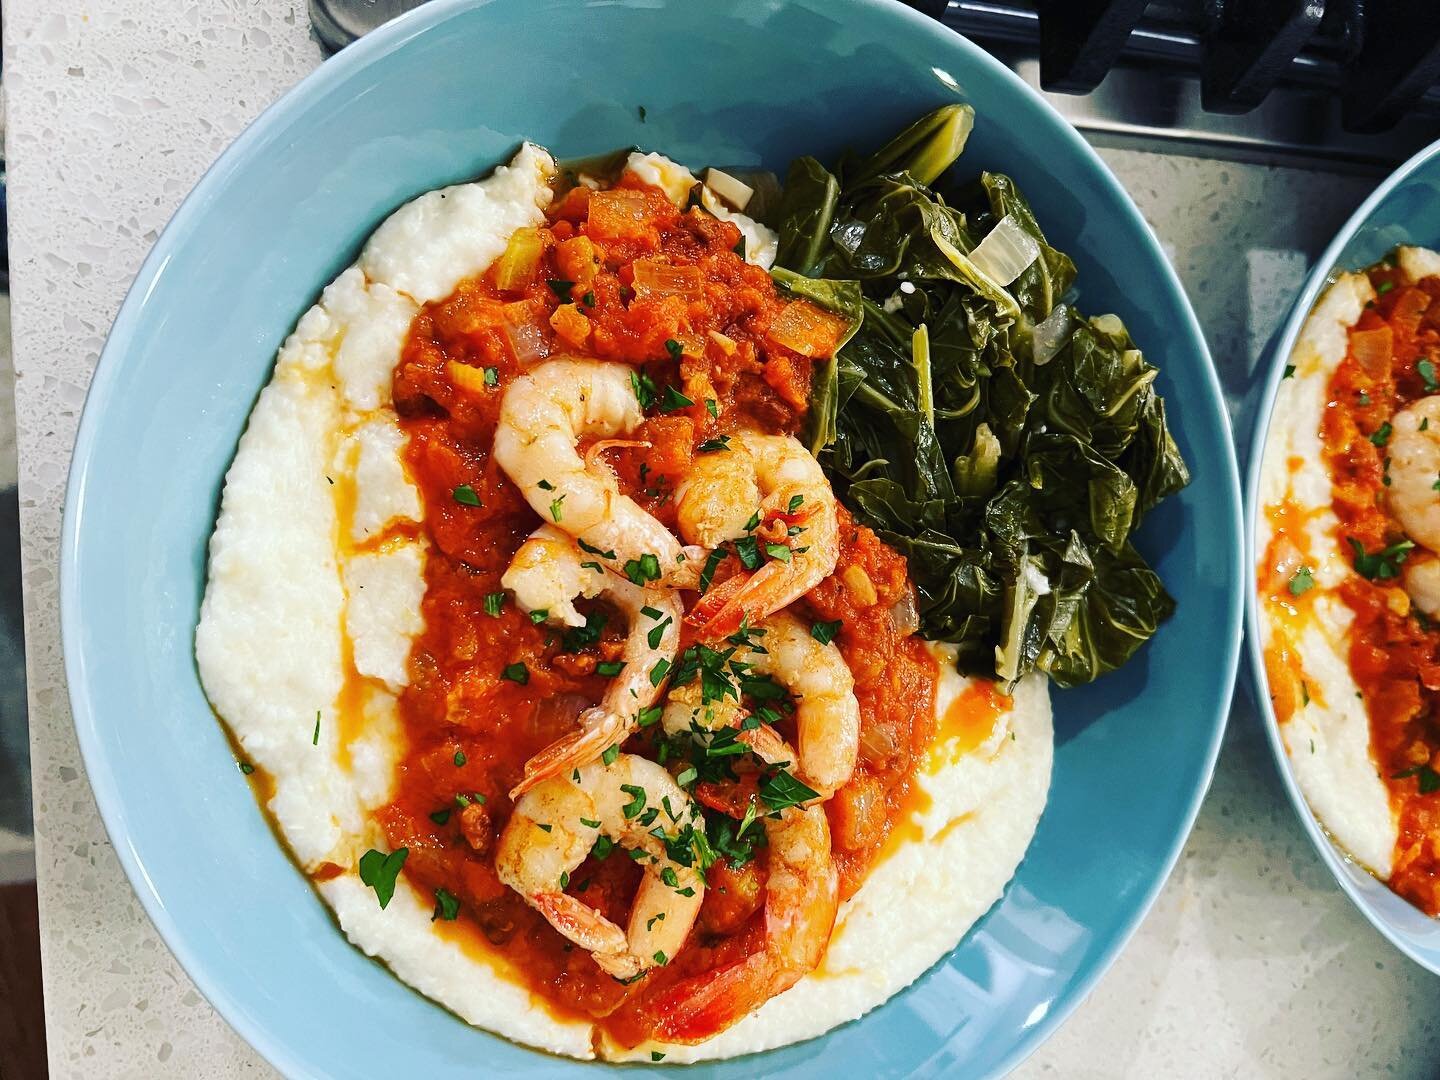 Deadline tonight for Monday&rsquo;s delivery! We&rsquo;ve got some favorites on the menu.

Charleston Style Shrimp and Grits
Vegetarian Option: Charleston Style Red Beans and Grits

+ 1 Side

Salmon Buddha Bowl-Rice, Asian Salmon, Edamame Tahini Sauc